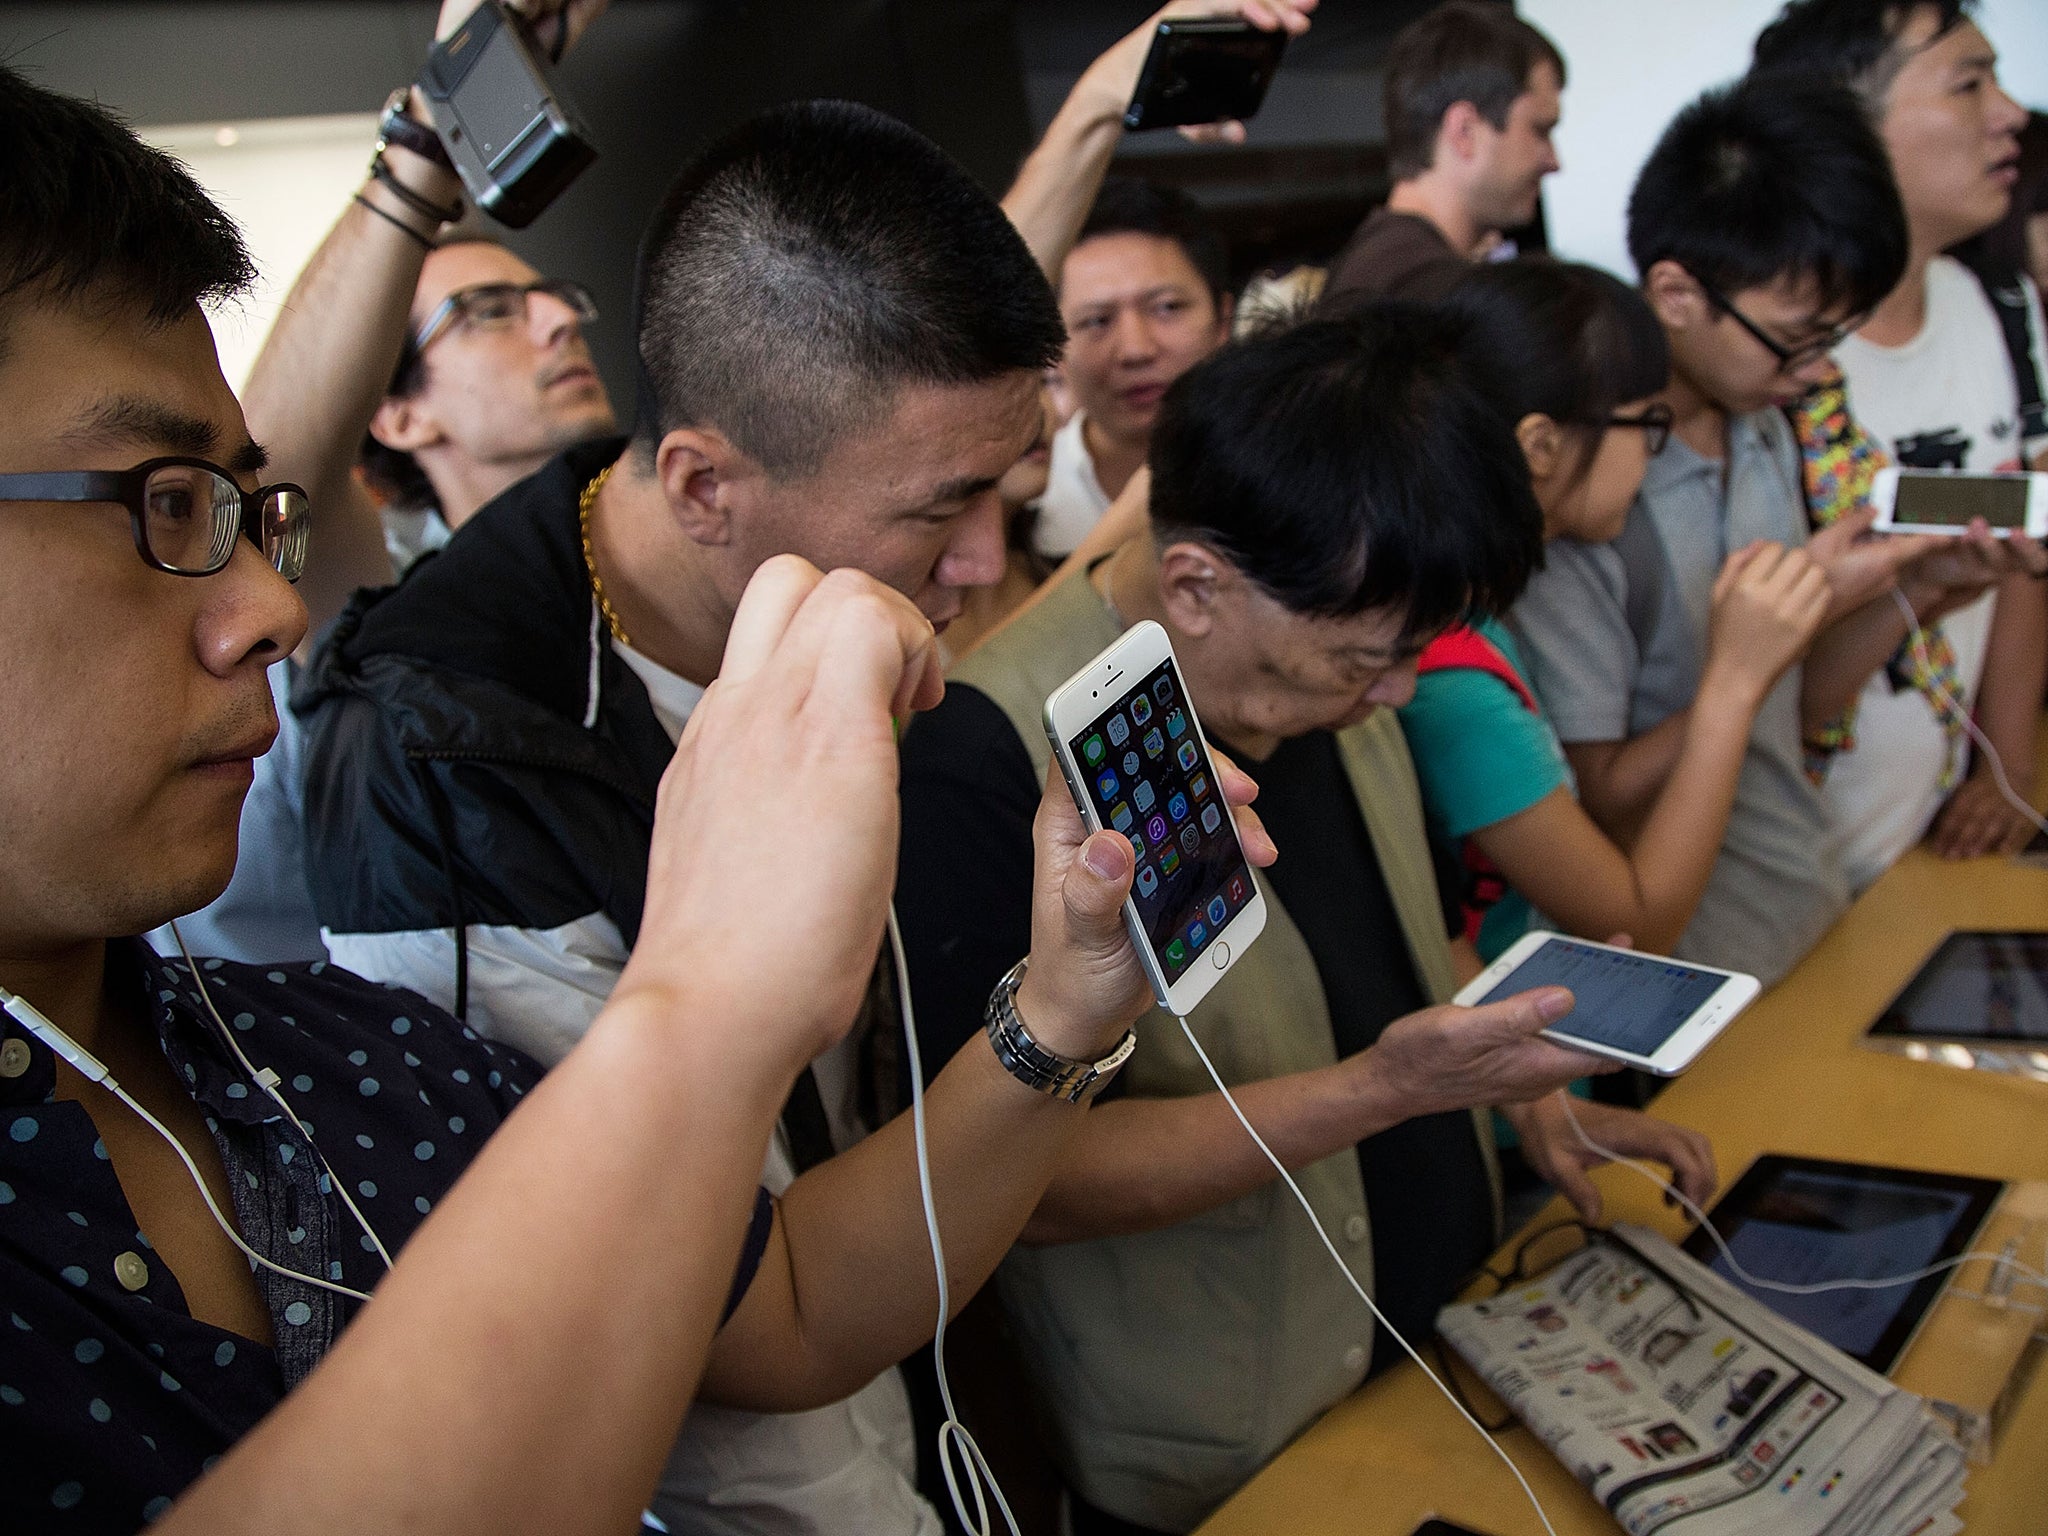 Customers look at the new iPhones on display at the launch of the new Apple iPhone 6 and iphone 6 plus at the Apple IFC store in Hong Kong